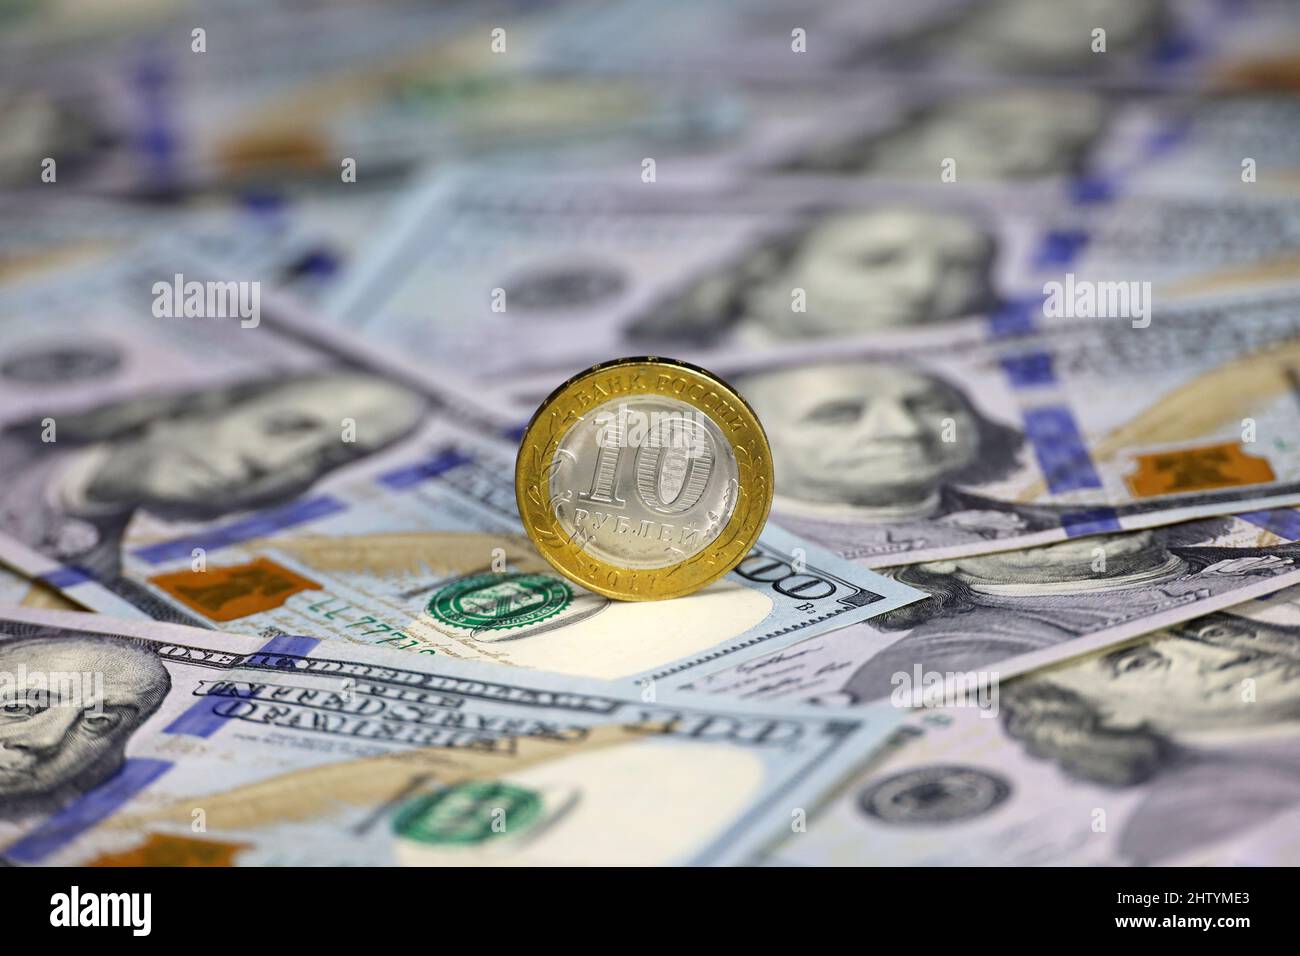 Russian rubles coin on background of US dollars. Concept of exchange rate, sanctions, falling ruble Stock Photo